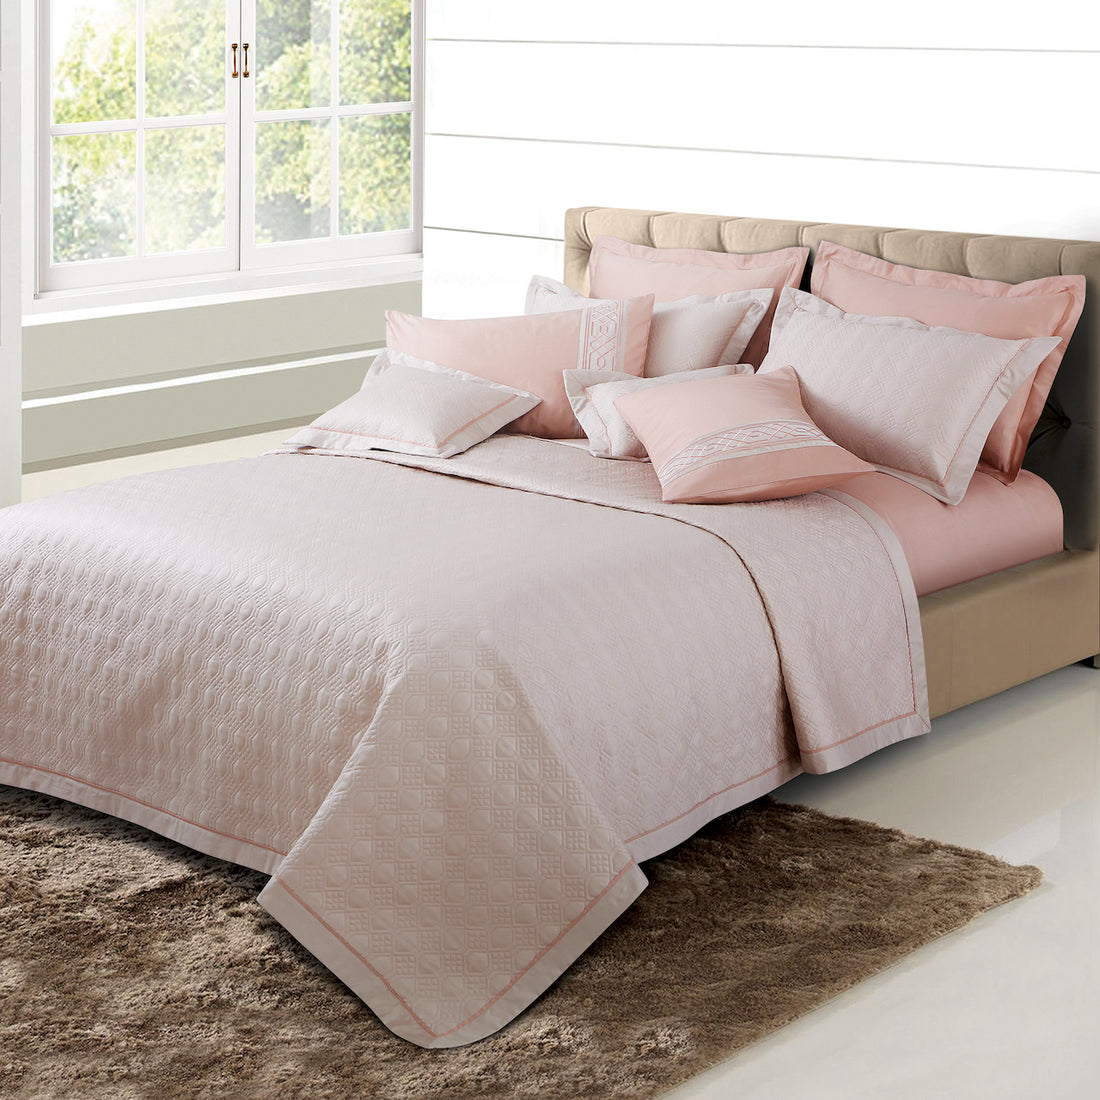 Kairo Quilted Bedcover - Almond Beige